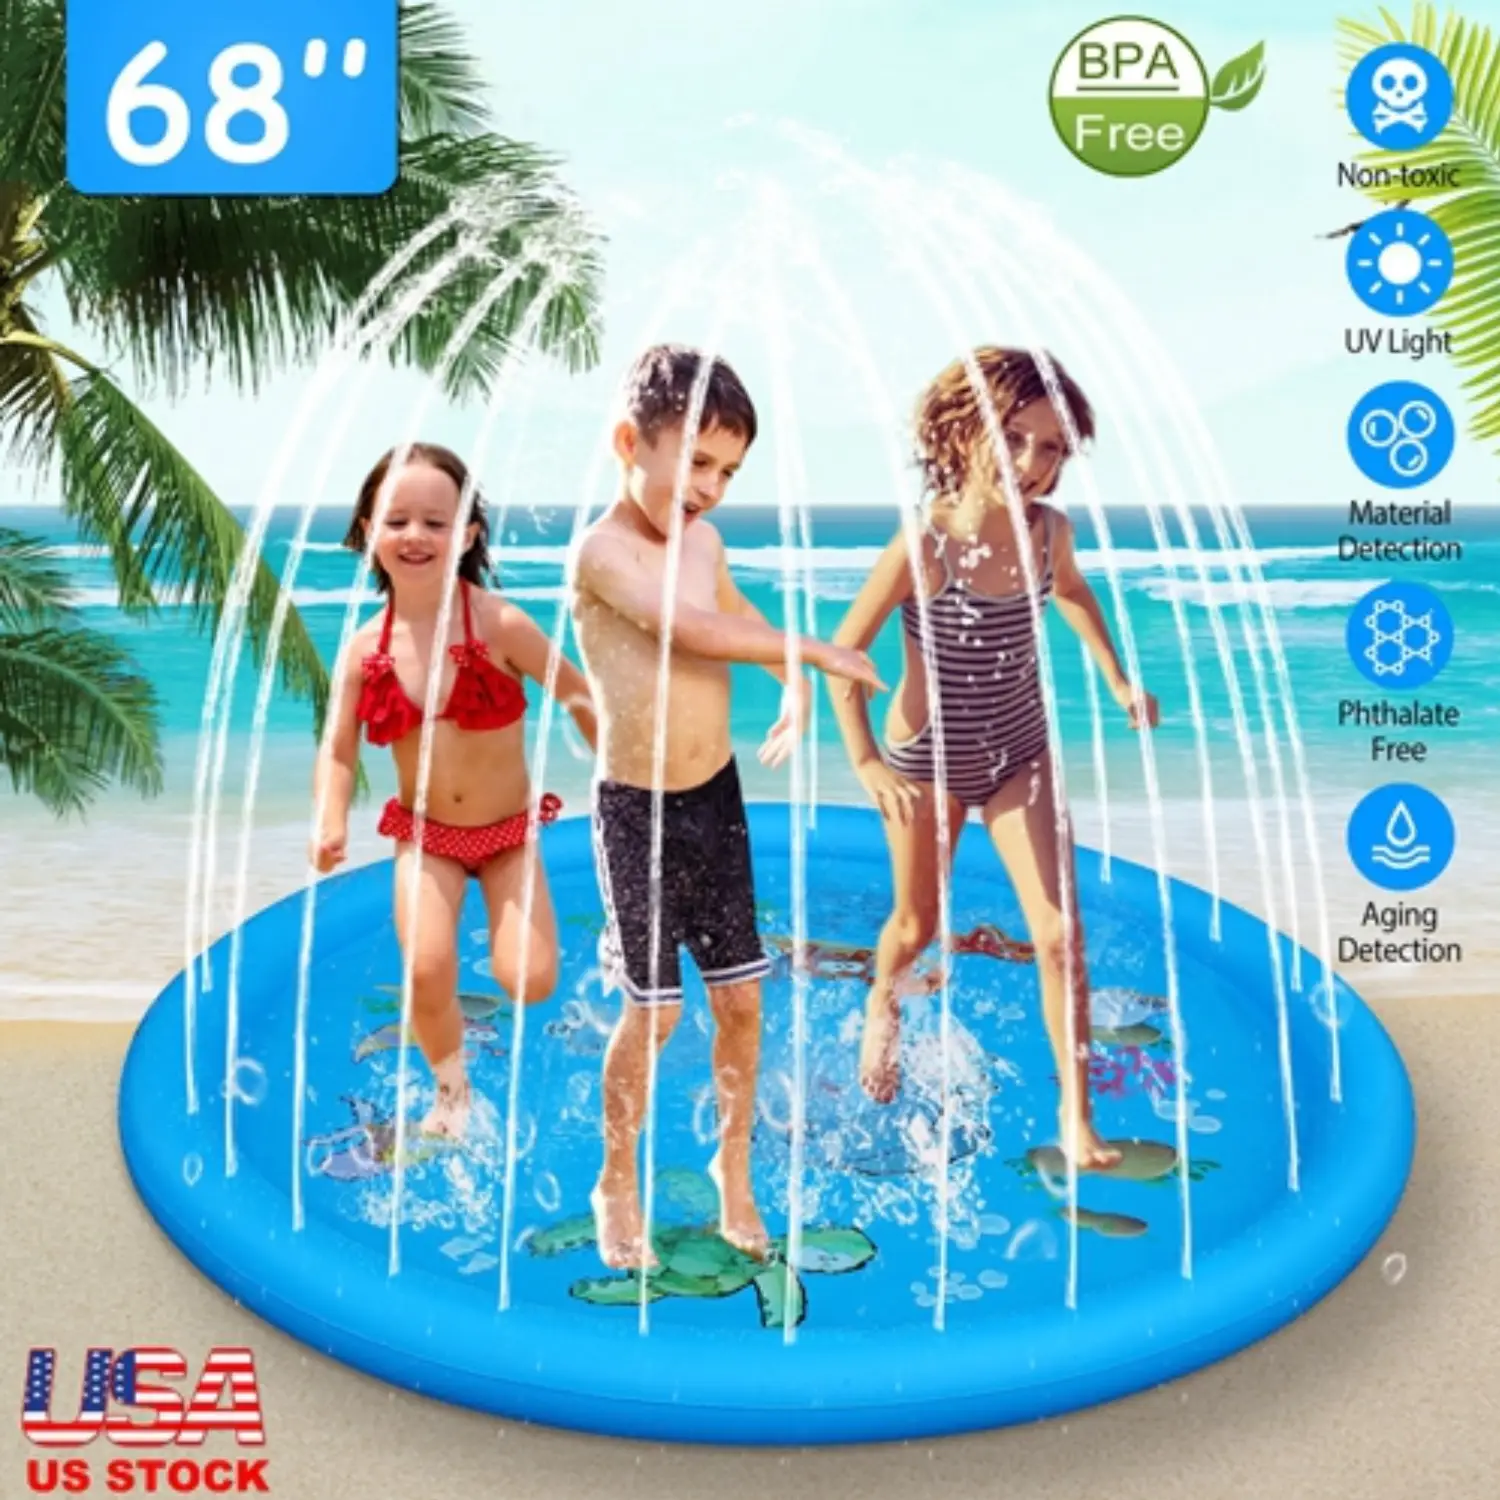 Sprinkler And Splash Pad For Kids 68In Inflatable Blow Up Pool Mat Summer Outdoor Water Toys